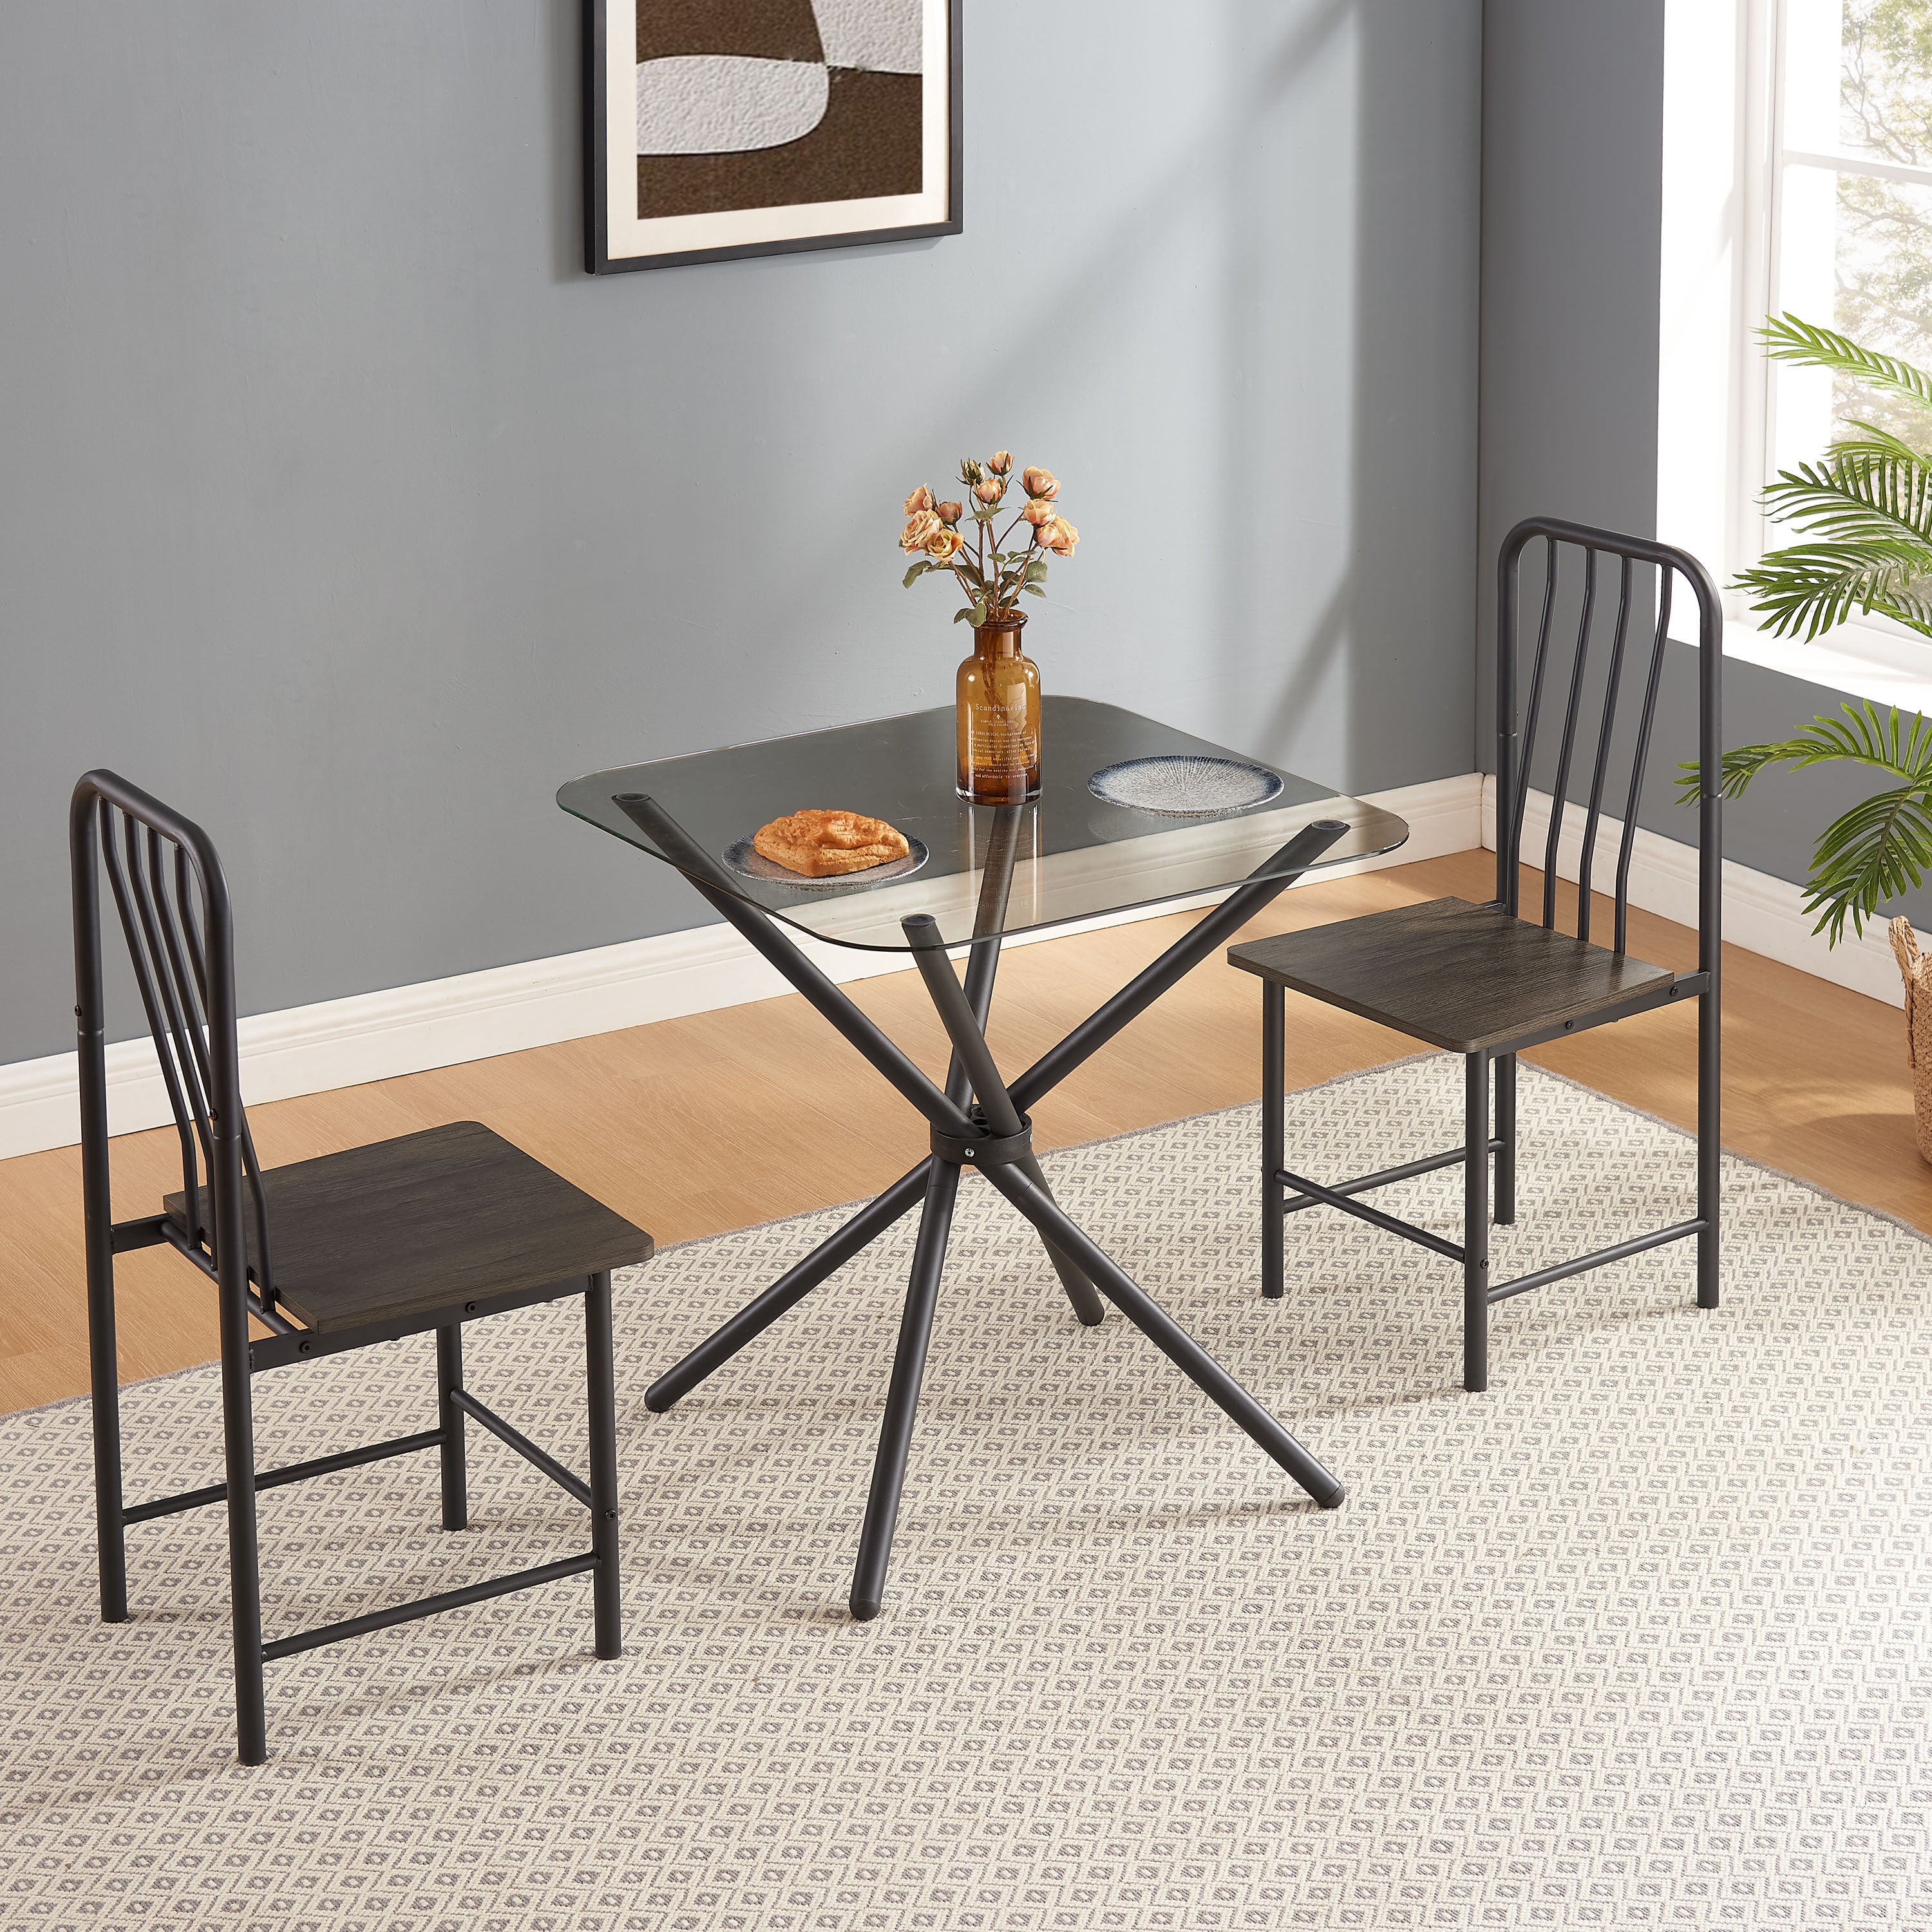 🆓🚛 Dining Set for 2, Square Glass Tempered Dining Table With 4 Legs and 2 Metal Chair for Home Office Kitchen Dining Room, Black & Brown